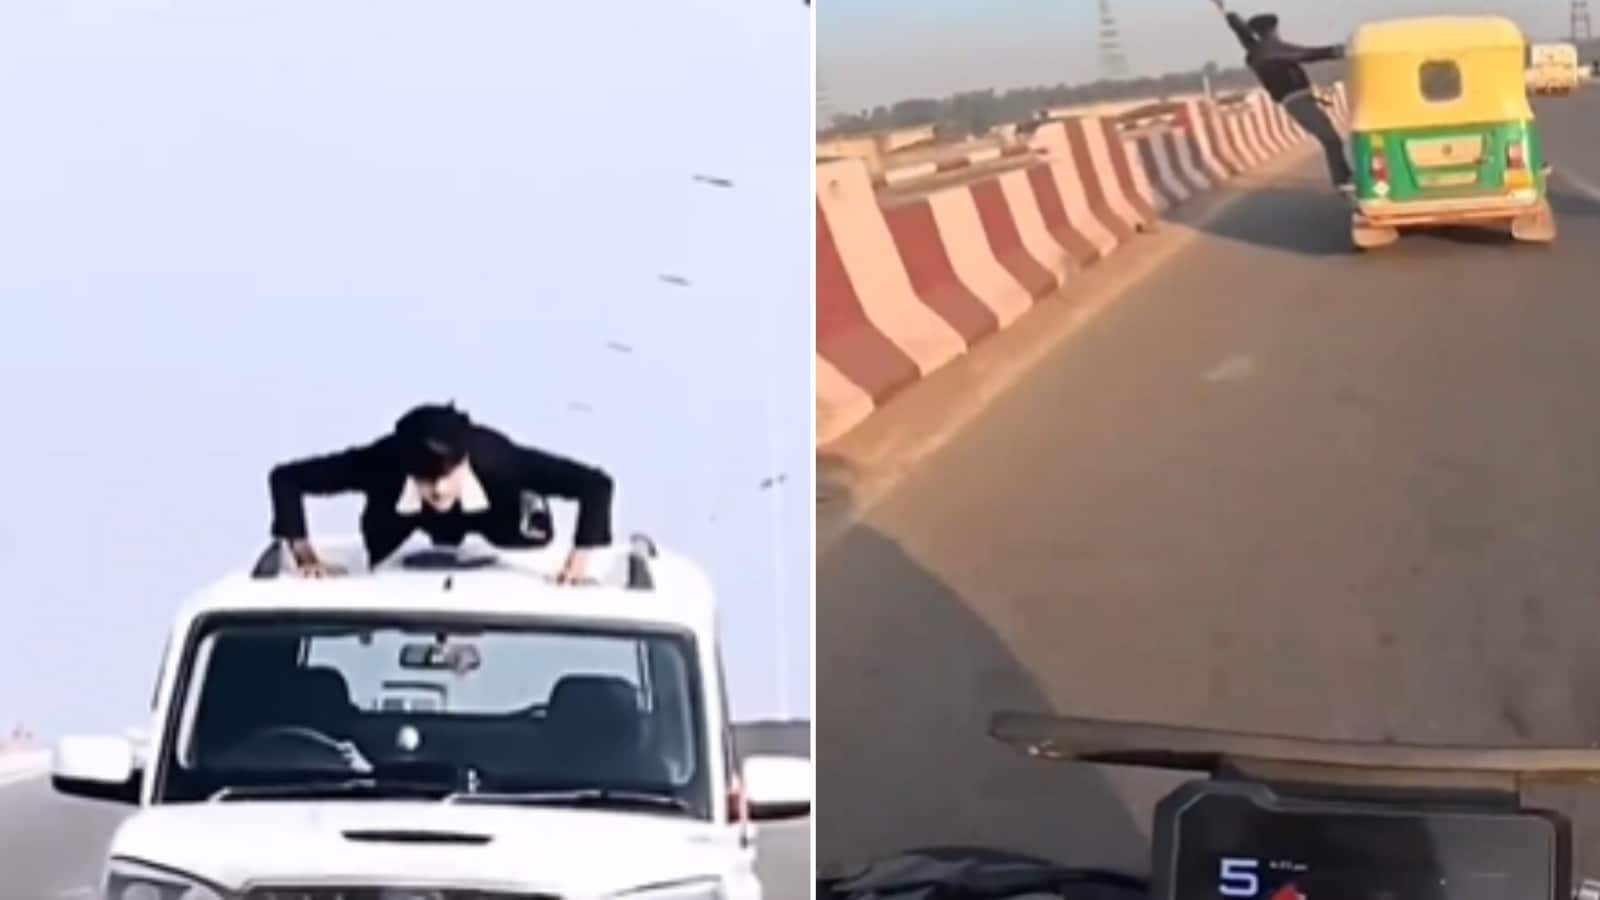 5 times people performed dangerous stunts and landed in trouble for them